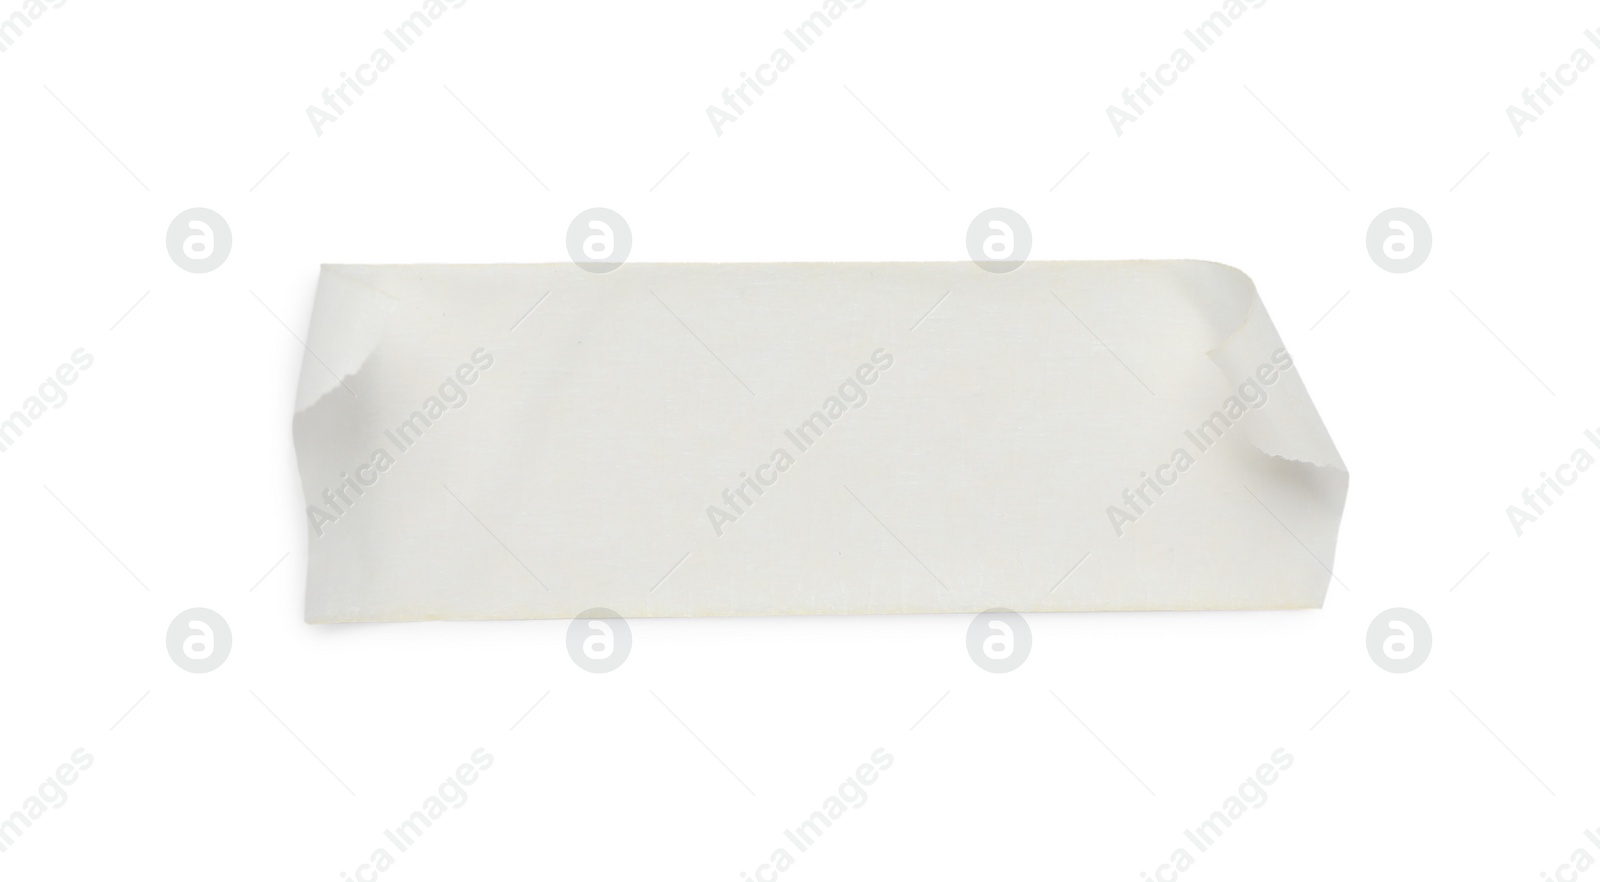 Photo of Piece of masking adhesive tape isolated on white, top view